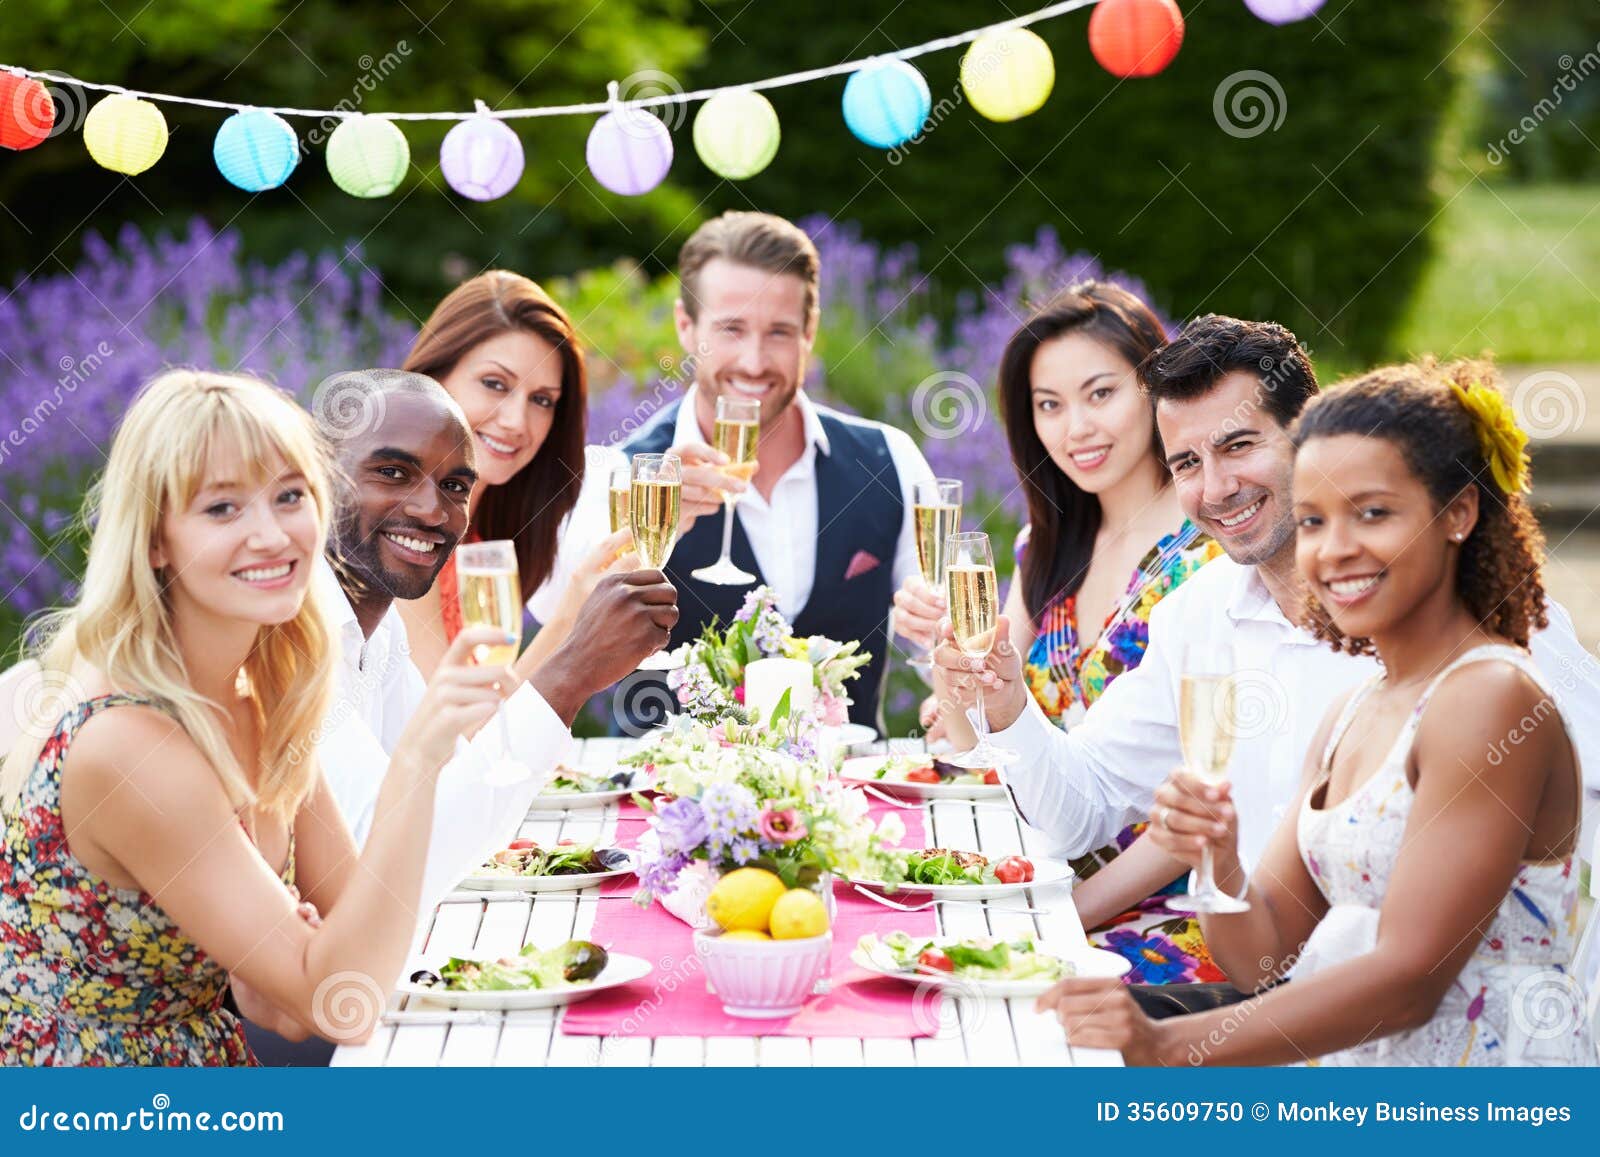 group of friends enjoying outdoor dinner party